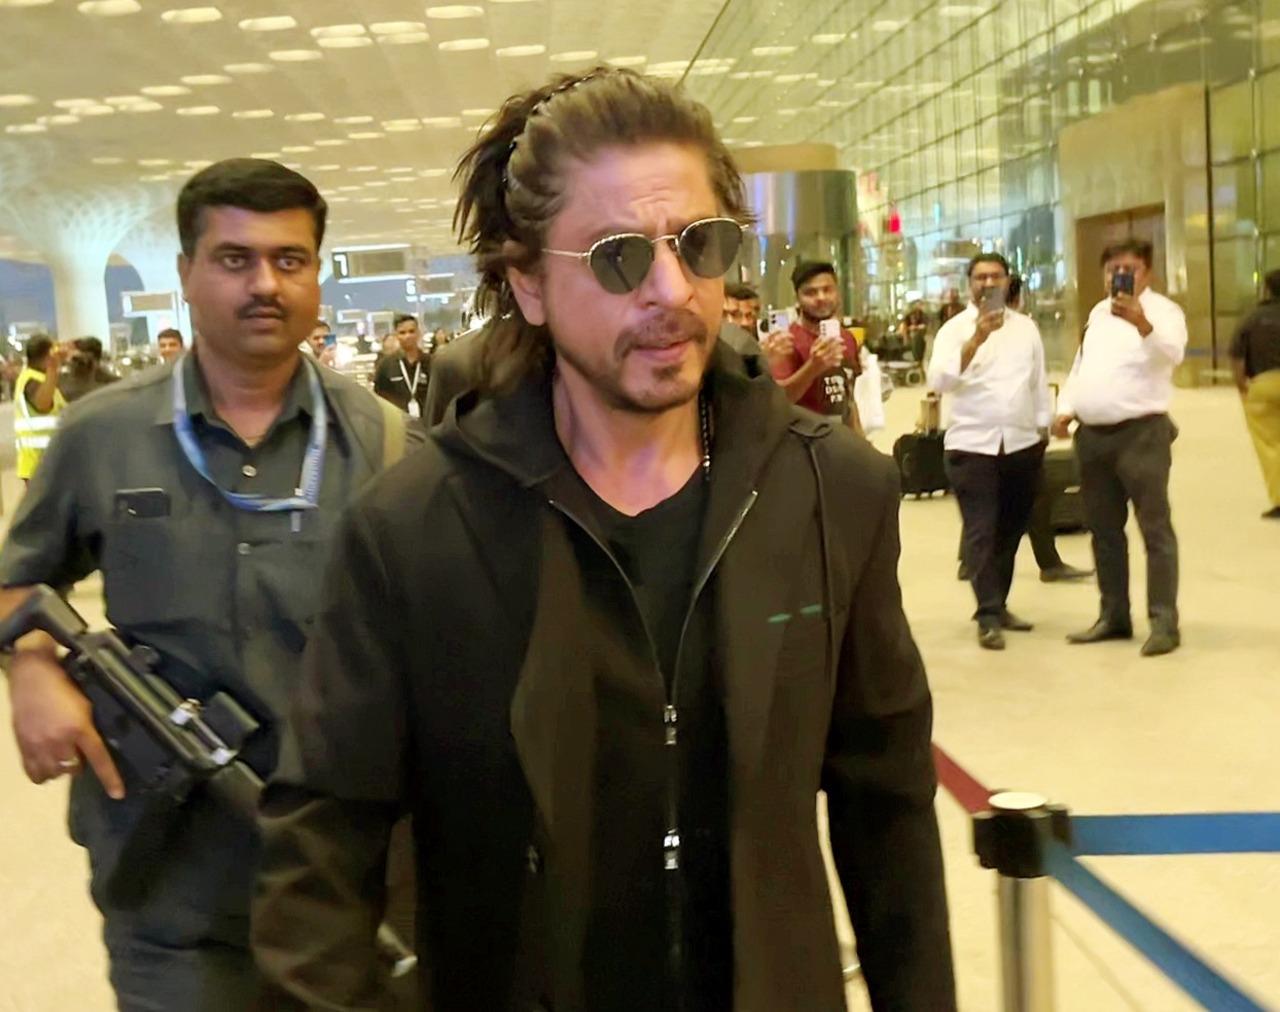 SRK looked stunning in an all-black suit at the airport sporting long hair